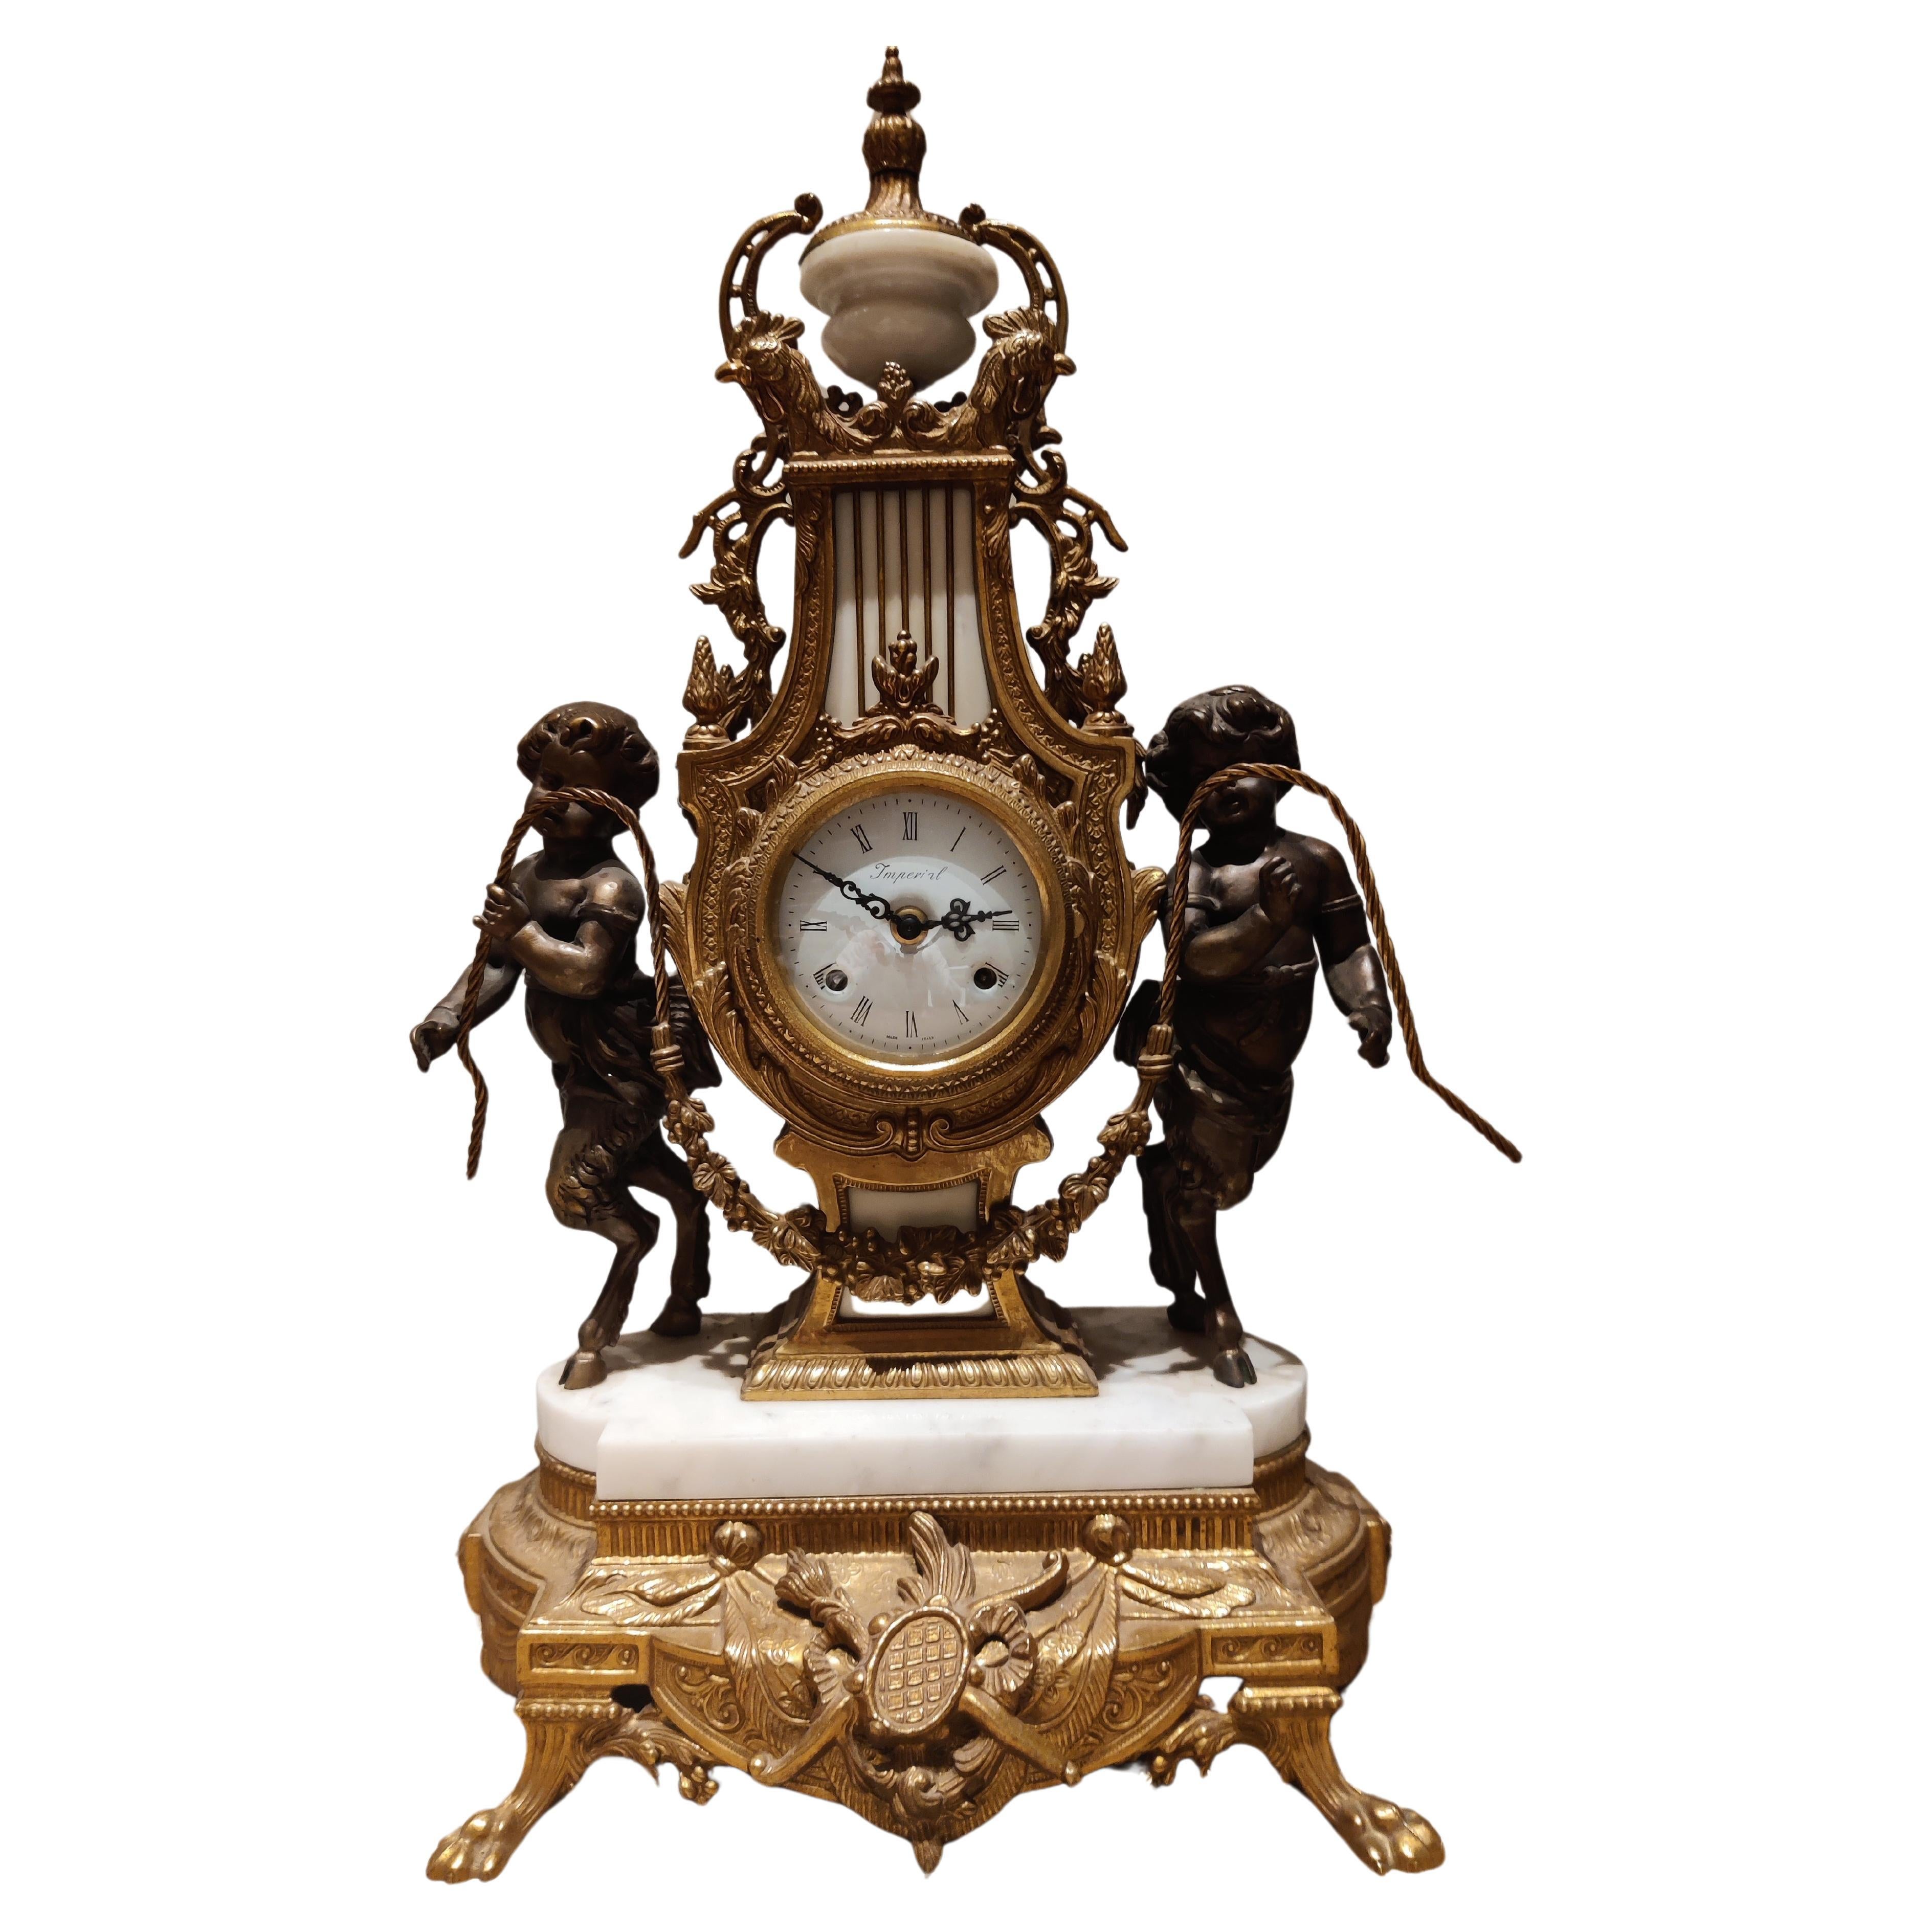 Vintage Imperial Mantle or Table Clock decorated with two angels